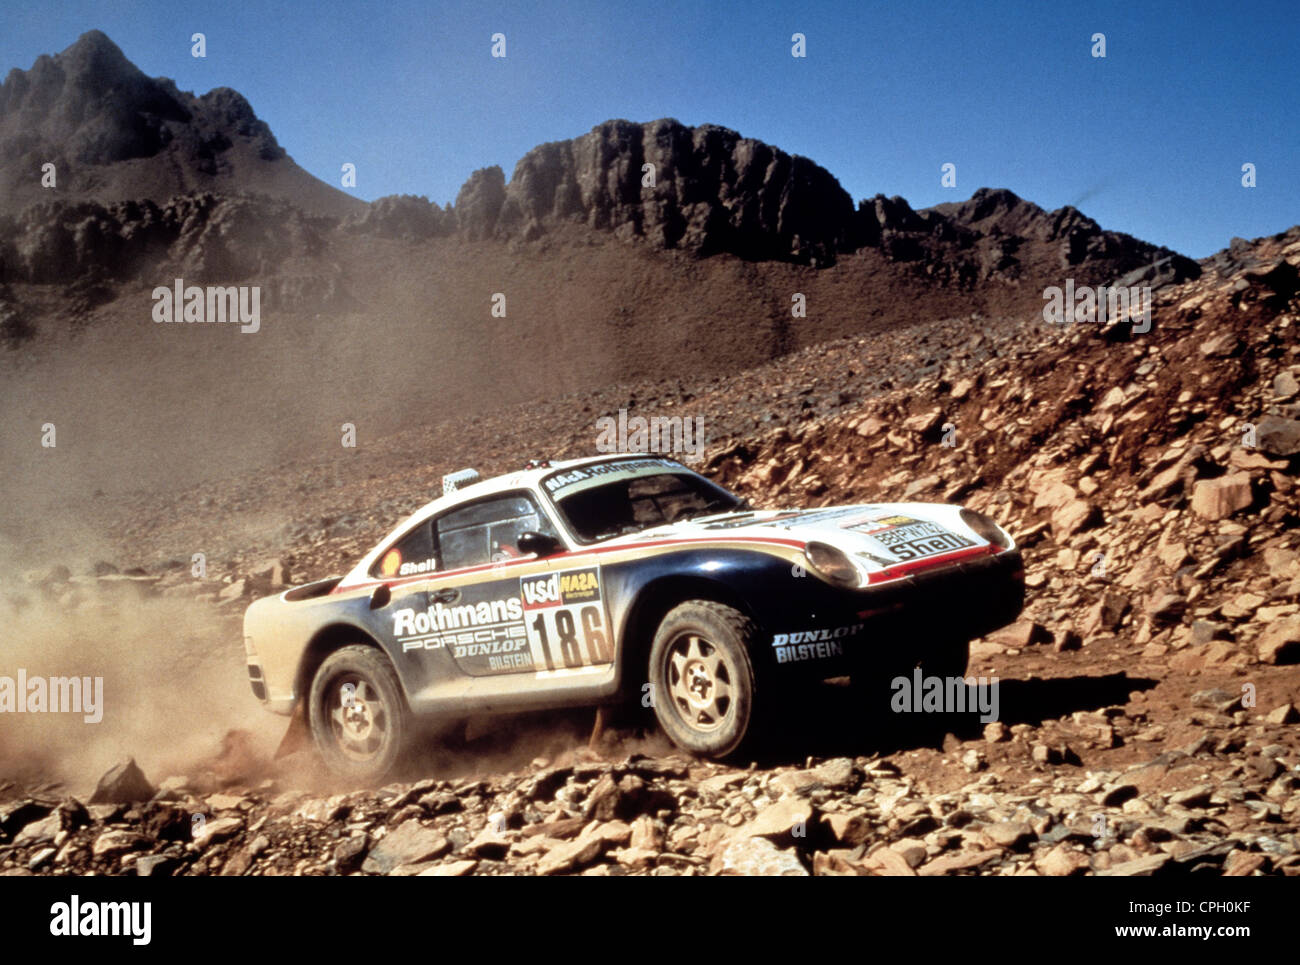 transport / transportation, cars, vehicle variants, Porsche 959, Offroad vehicle in action, year of construction: 1986, 1980s, 80s, 20th century, historic, historical, sports car, roadster, sports cars, roadsters, across country, cross-country, cut across country, car, cars, automobile, automobiles, vehicle, variant, rally, motorsports, desert, deserts, racing, racing car, racer, racing cars, racers, driving, Additional-Rights-Clearences-Not Available Stock Photo